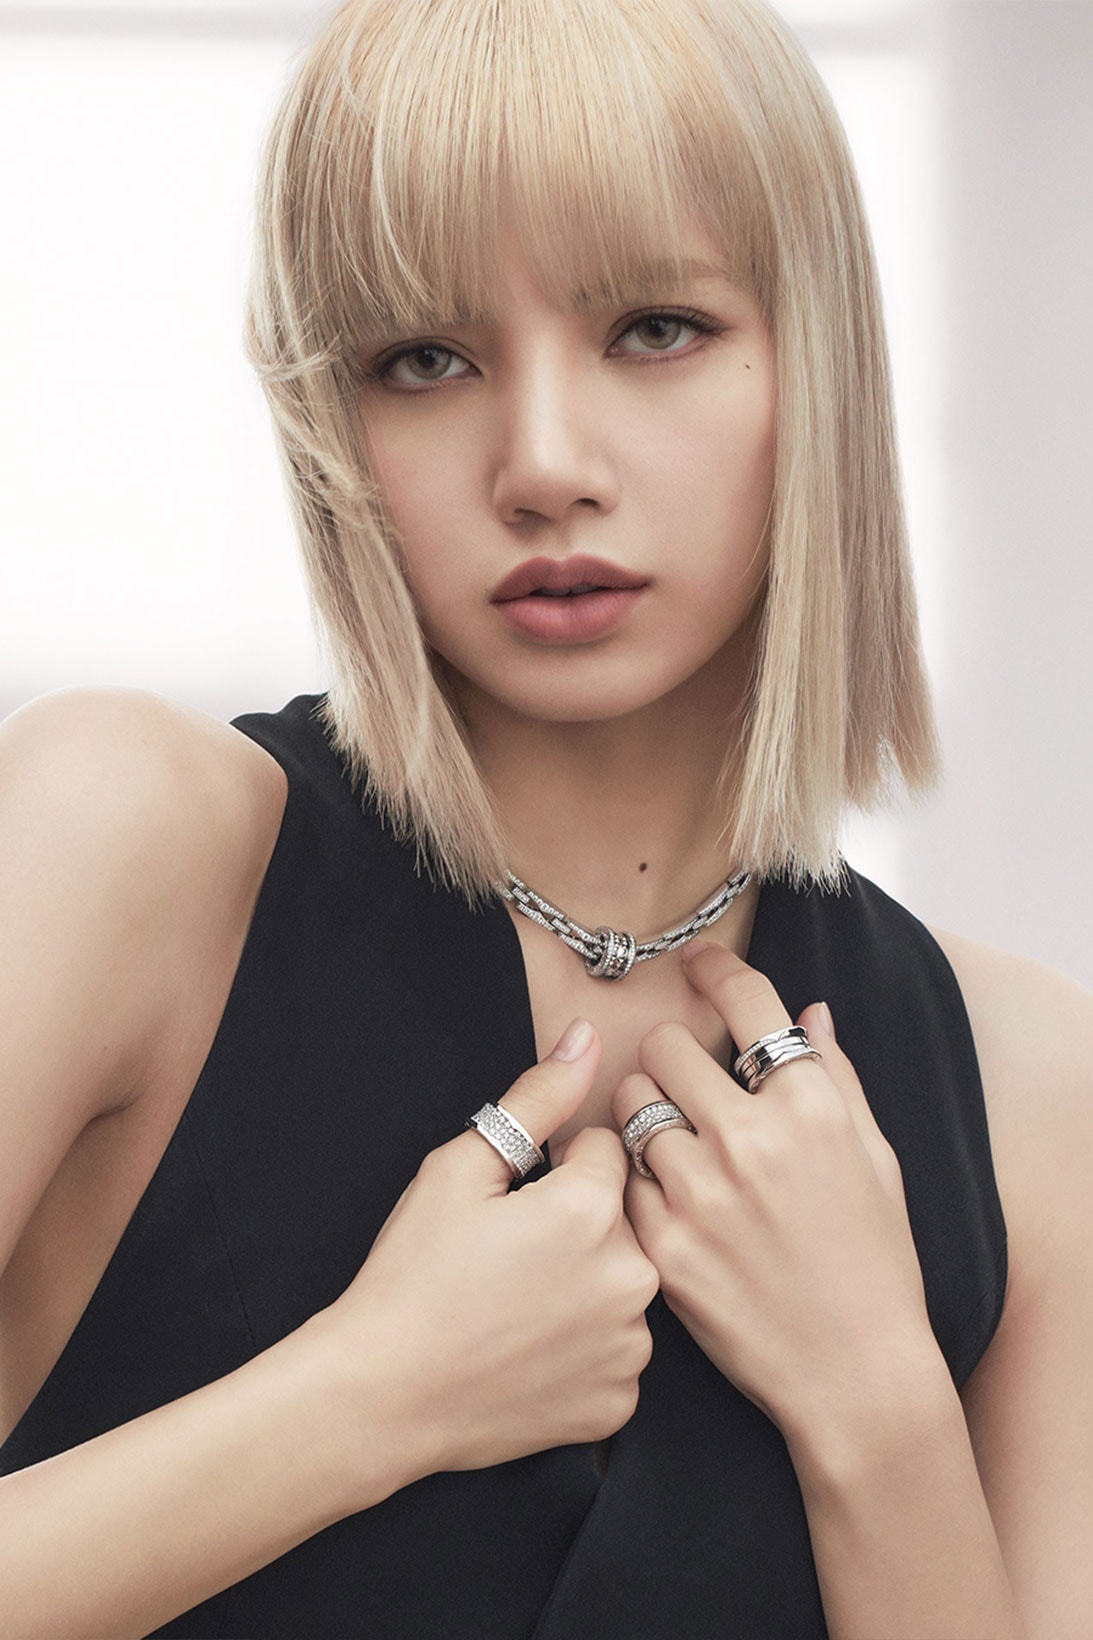 BVLGARI Lisa BLACKPINK Campaign Unexpected Wonders Images Video Watch